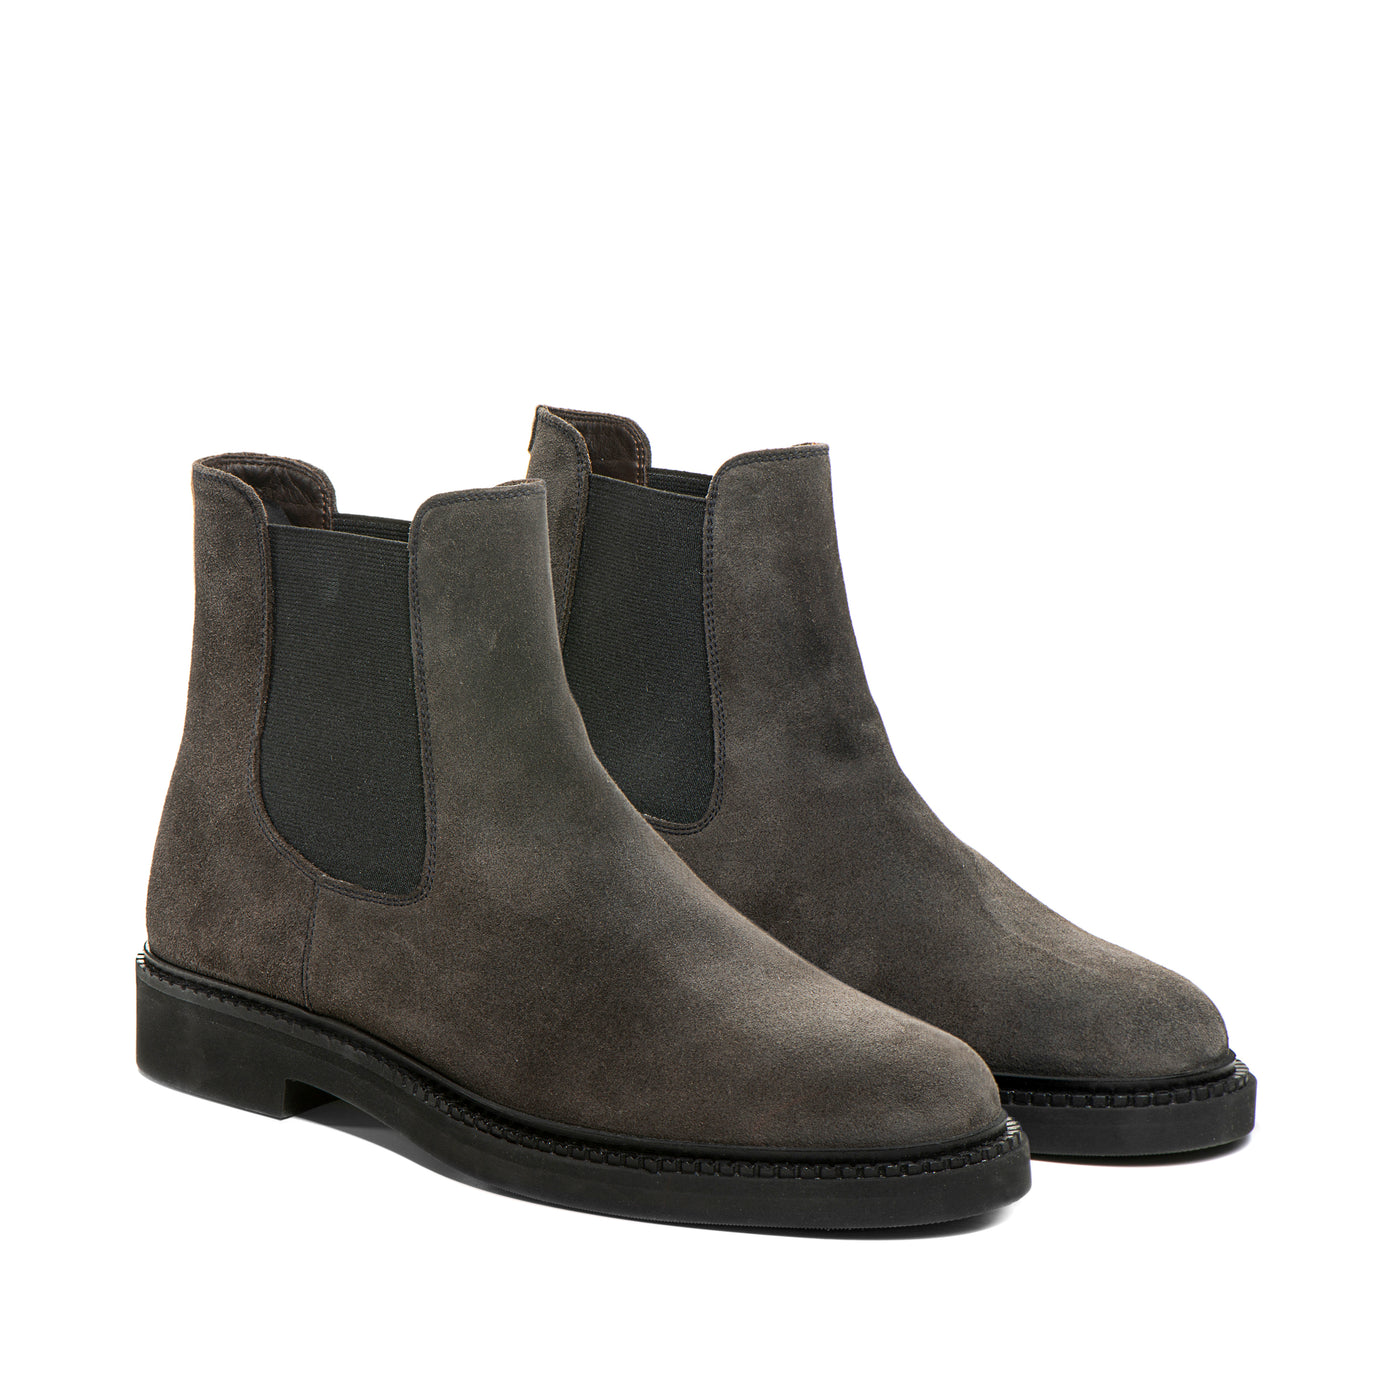 Shop The Latest Collection Of Fratelli Rossetti Man Suede Beatles Desert Boot 46482 In Lebanon